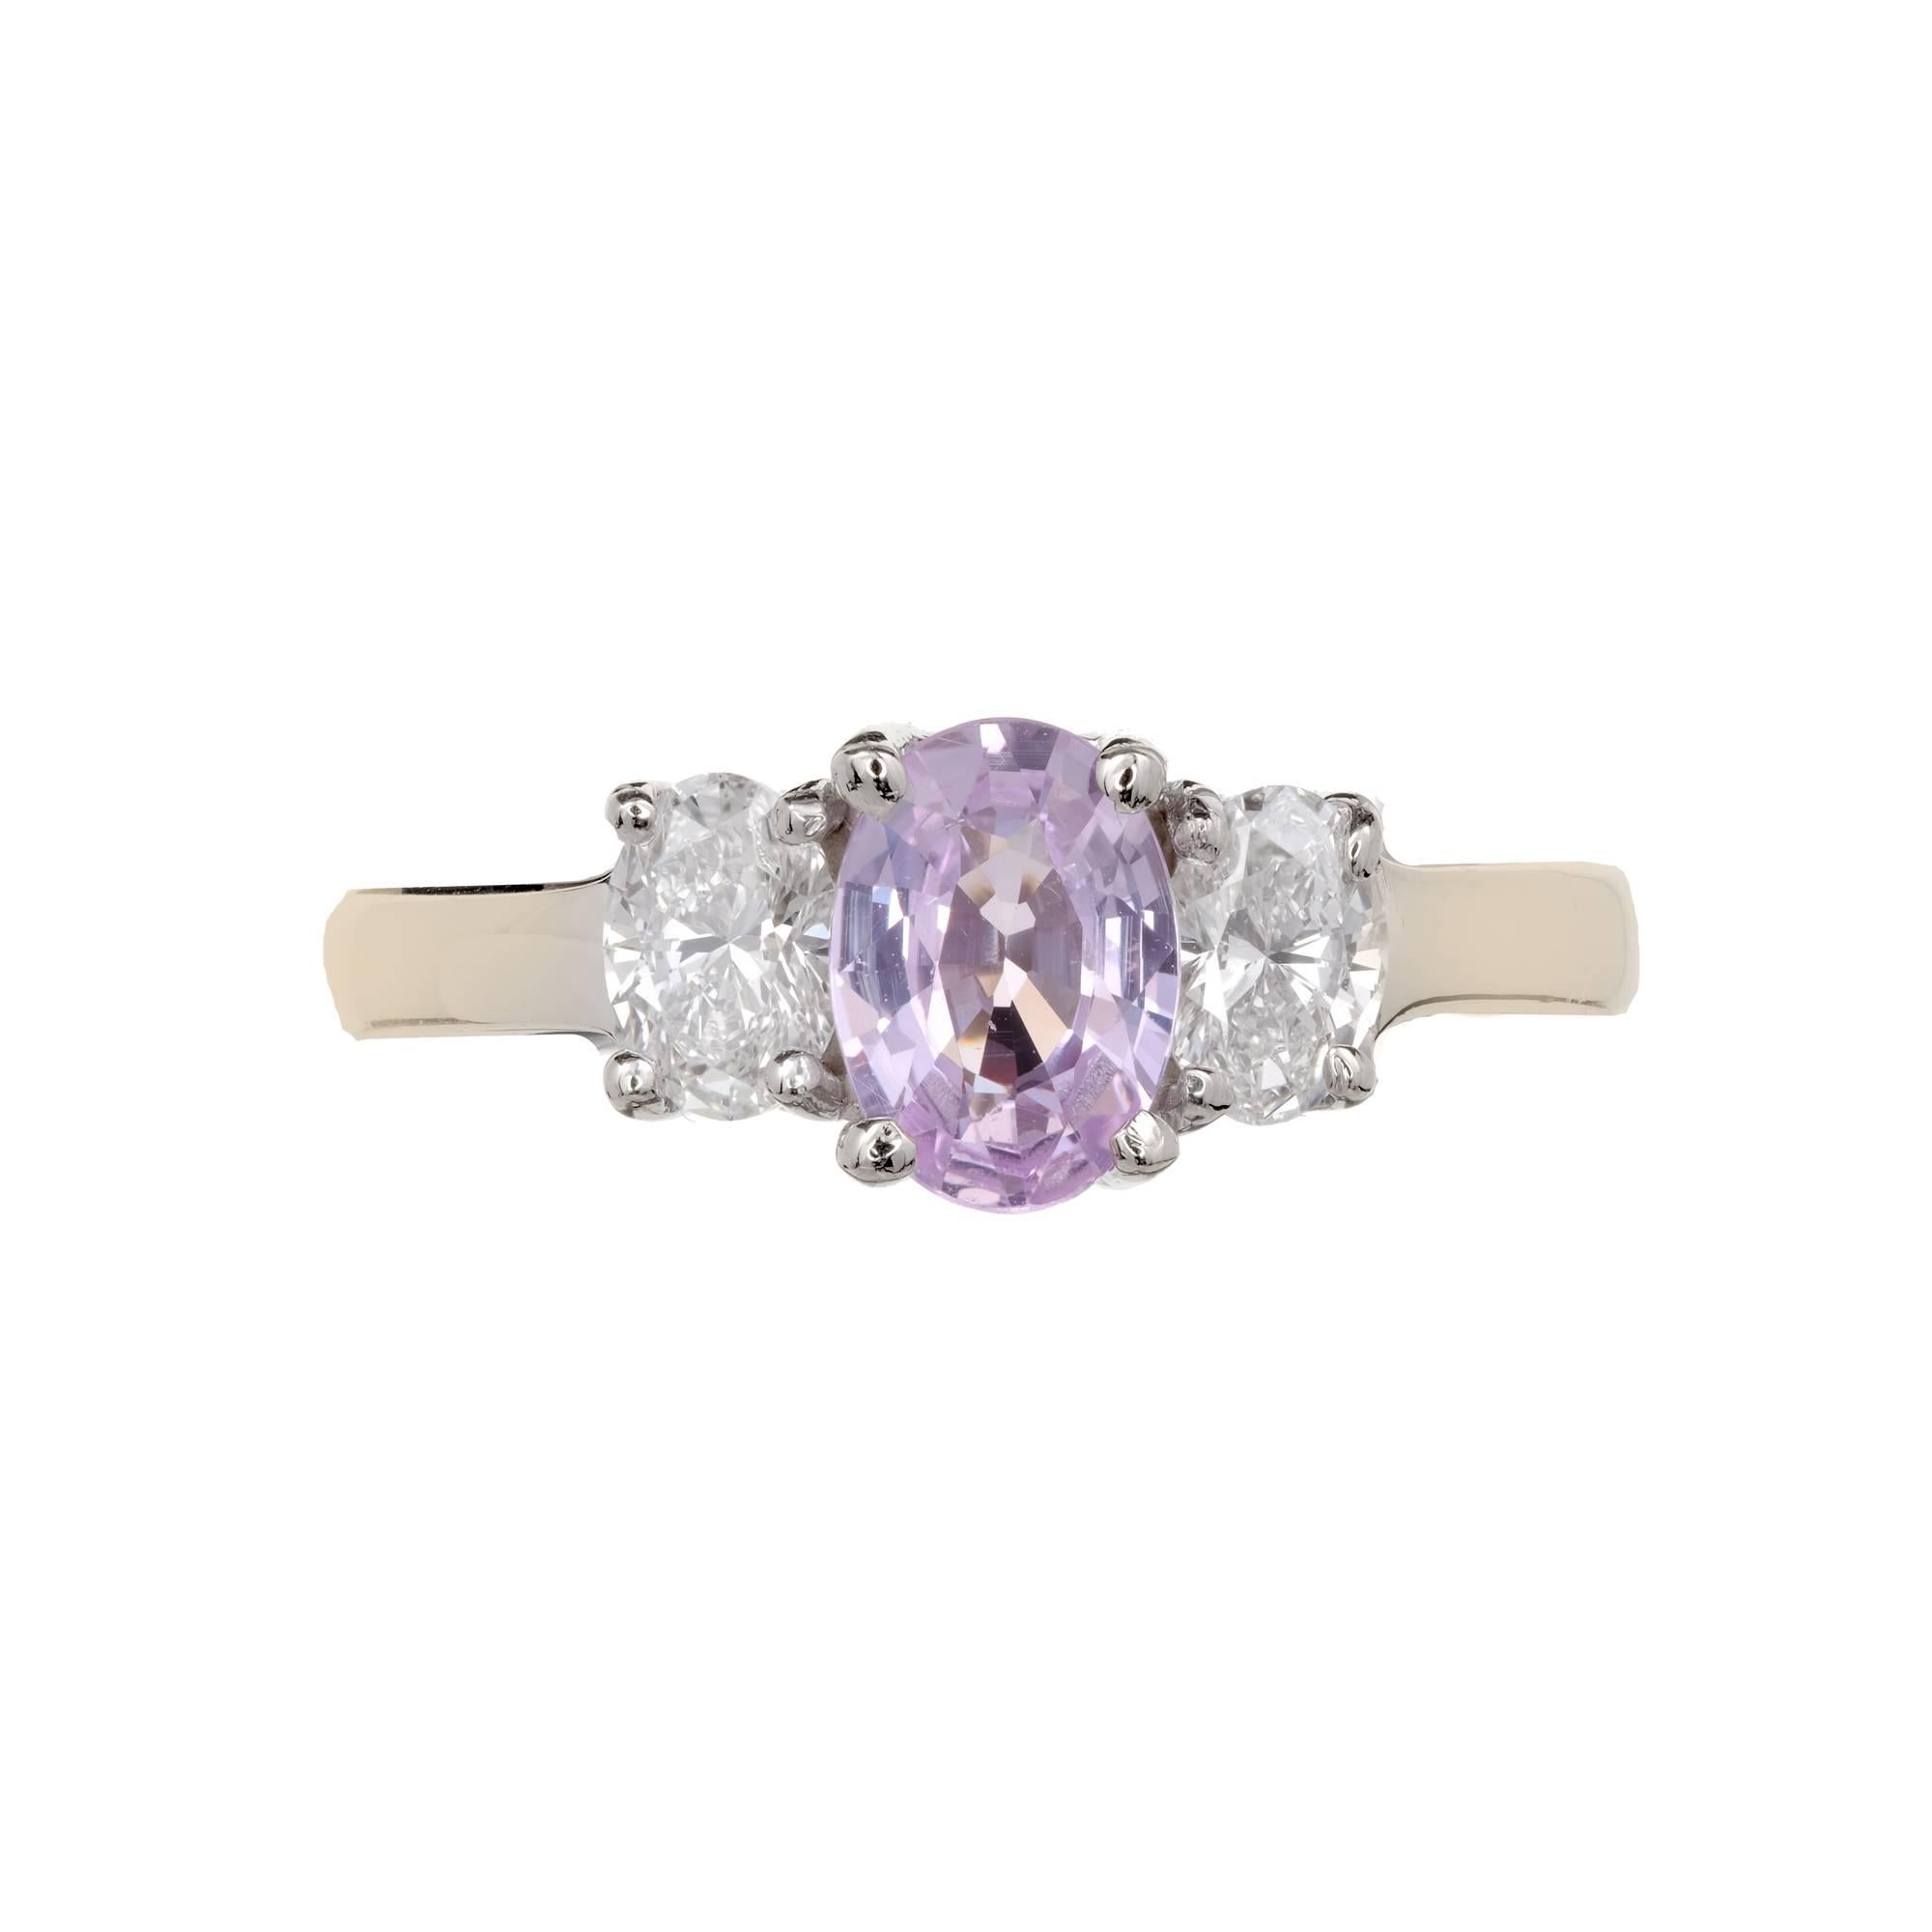 Peter Suchy GIA certified light pink purple Sapphire, simple heat only engagement ring. 14k white gold setting with oval side diamonds.

1 oval light pinkish purple Sapphire, approx. total weight .88cts, simple heat only, 4.78 x 3.50mm, GIA